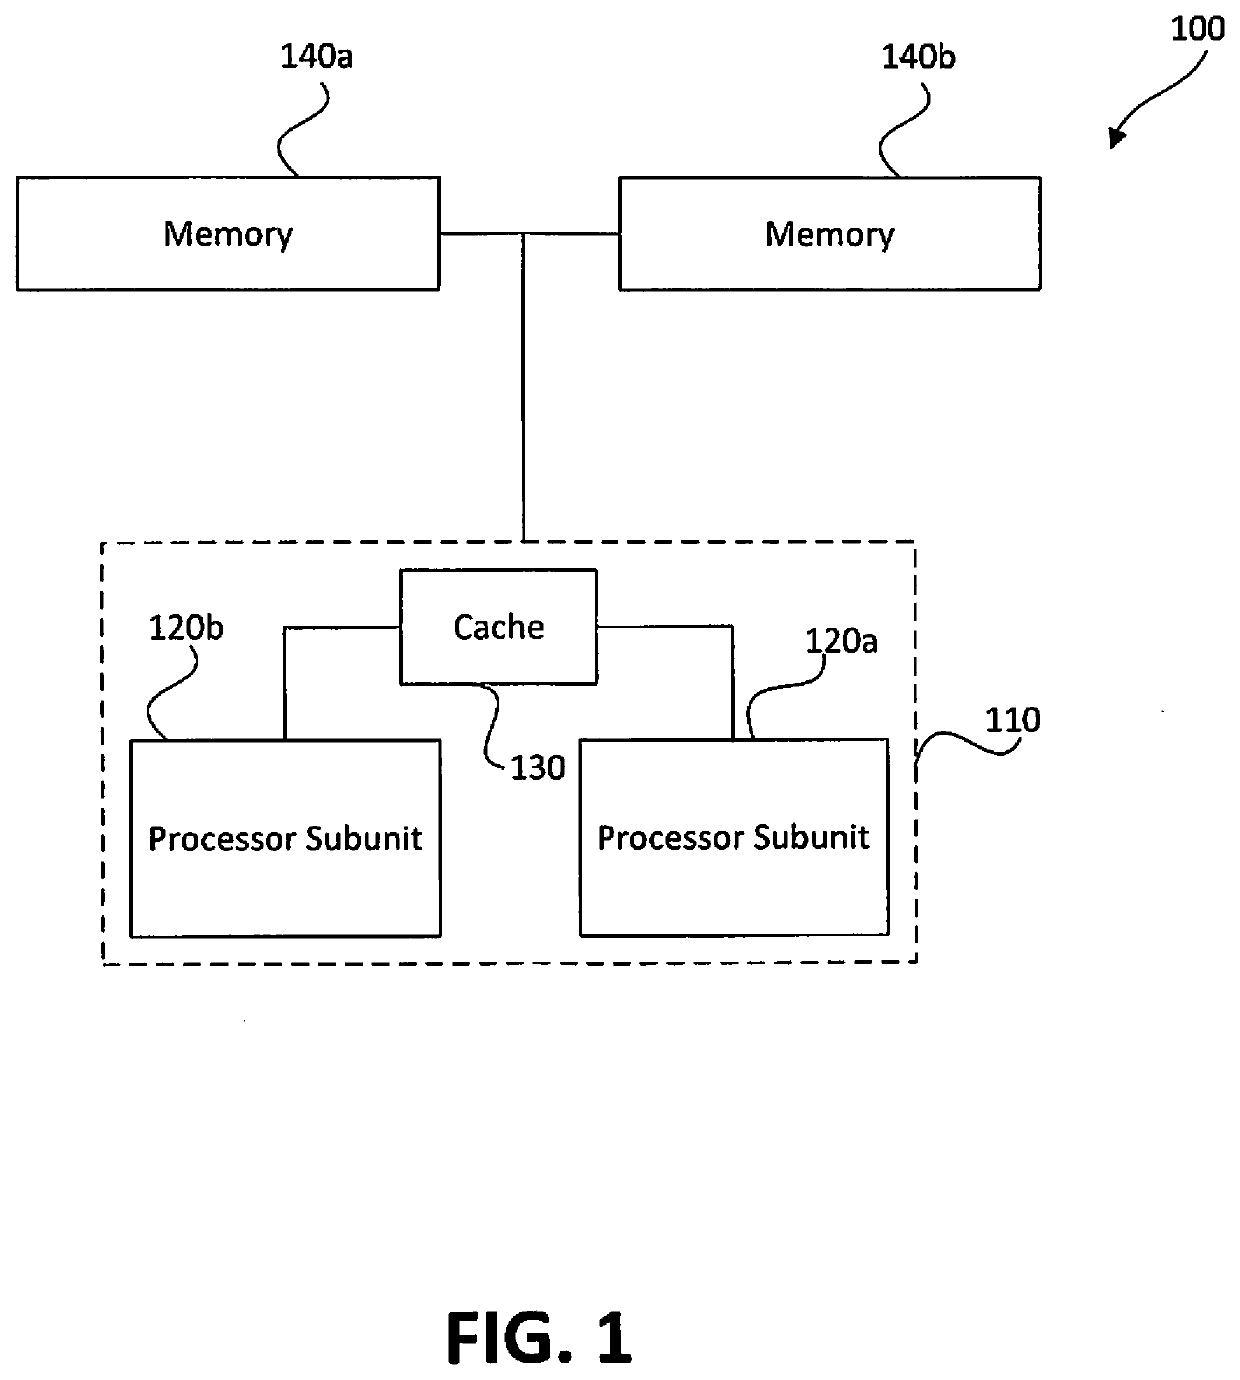 Memory-based distributed processor architecture